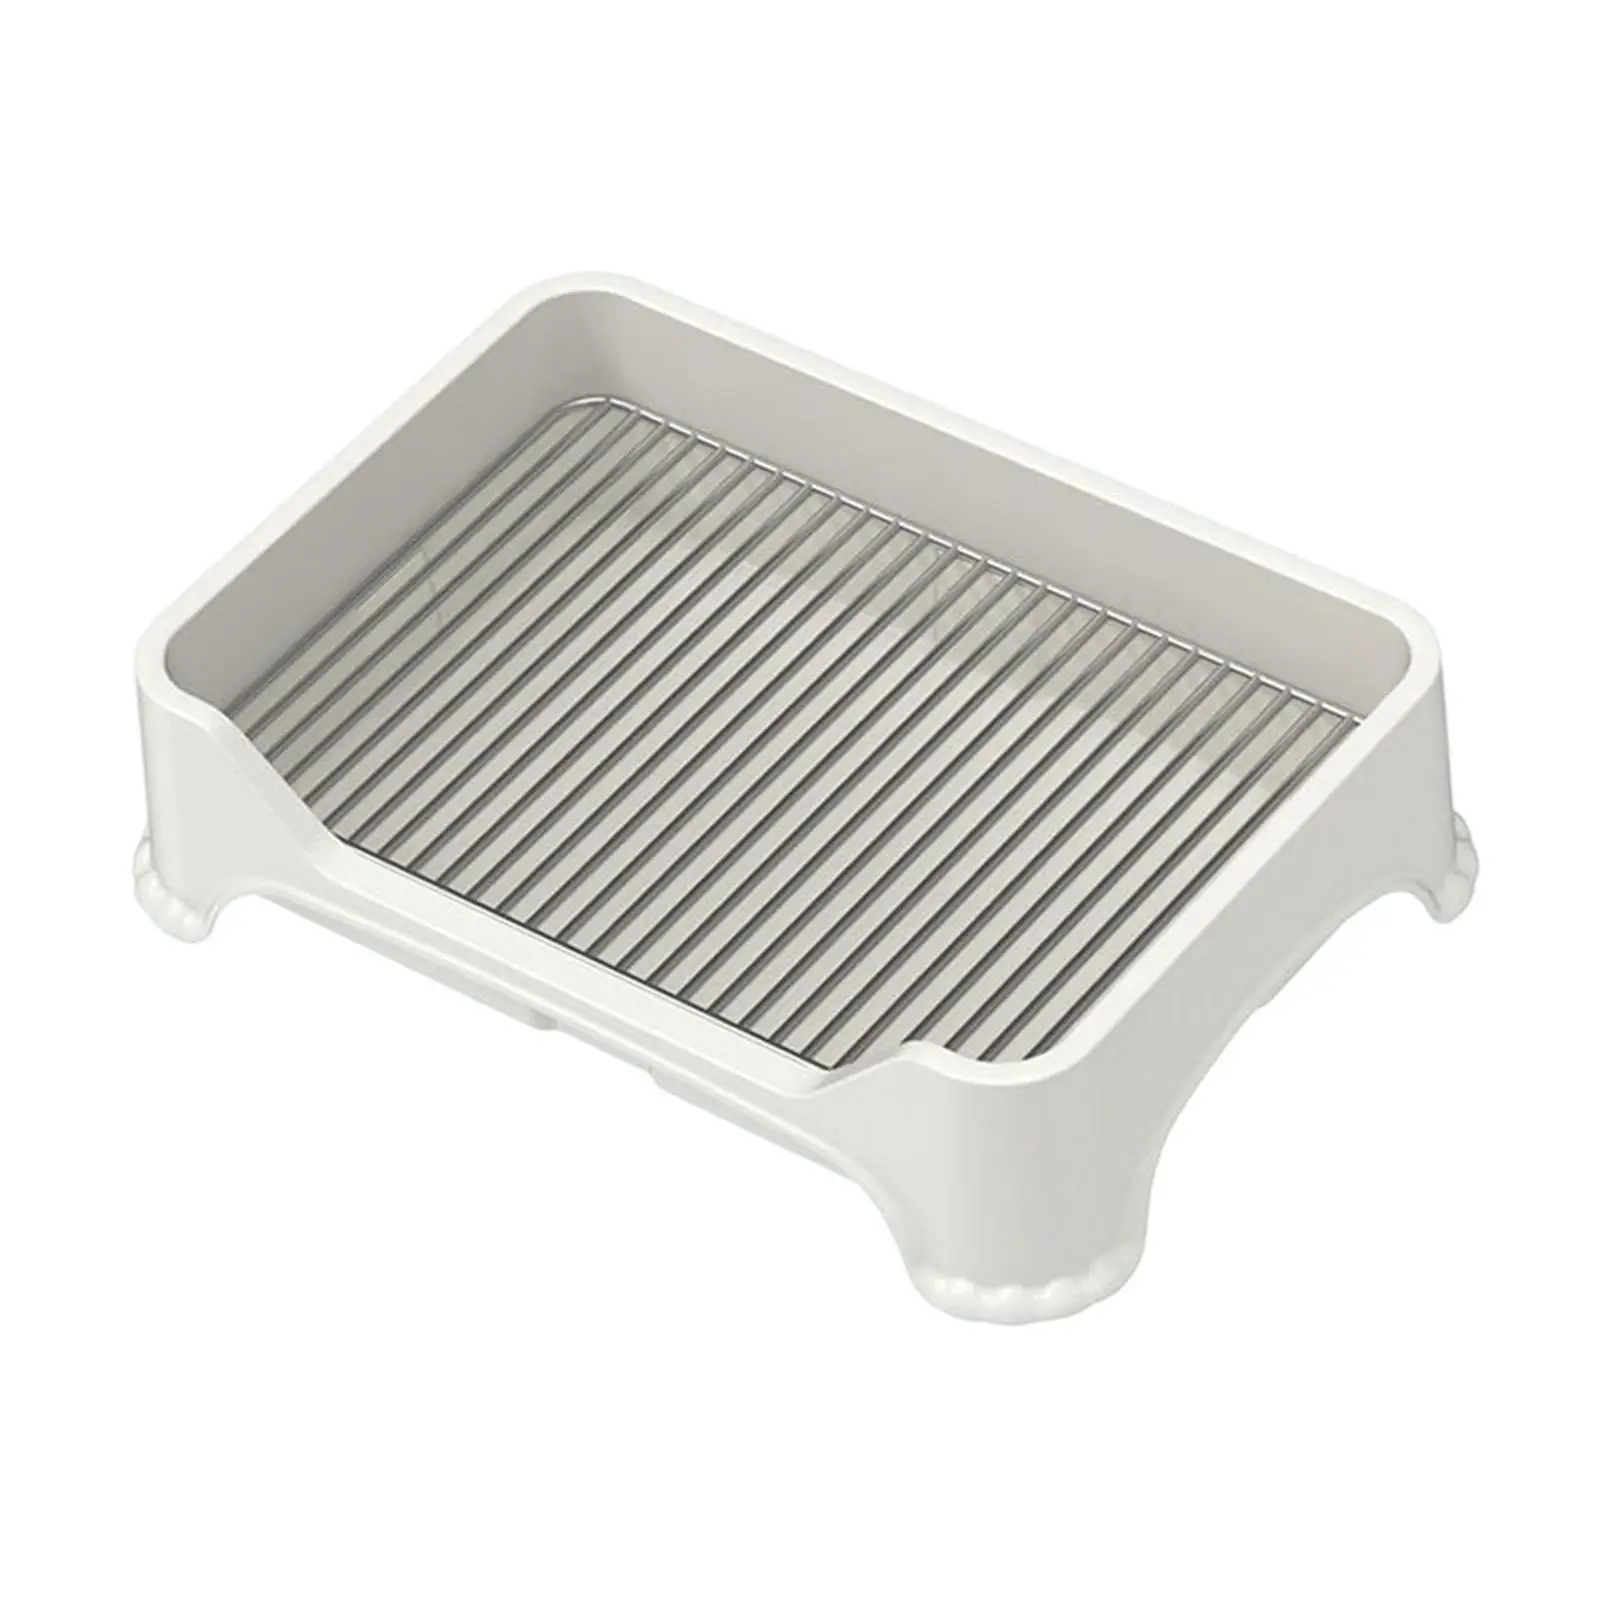 Pet Dog Toilet Outdoor Anti Splashing Dog Potty Tray Cleaning Tool Pet Litter Pan Litter Box Training Potty Tray Accessories